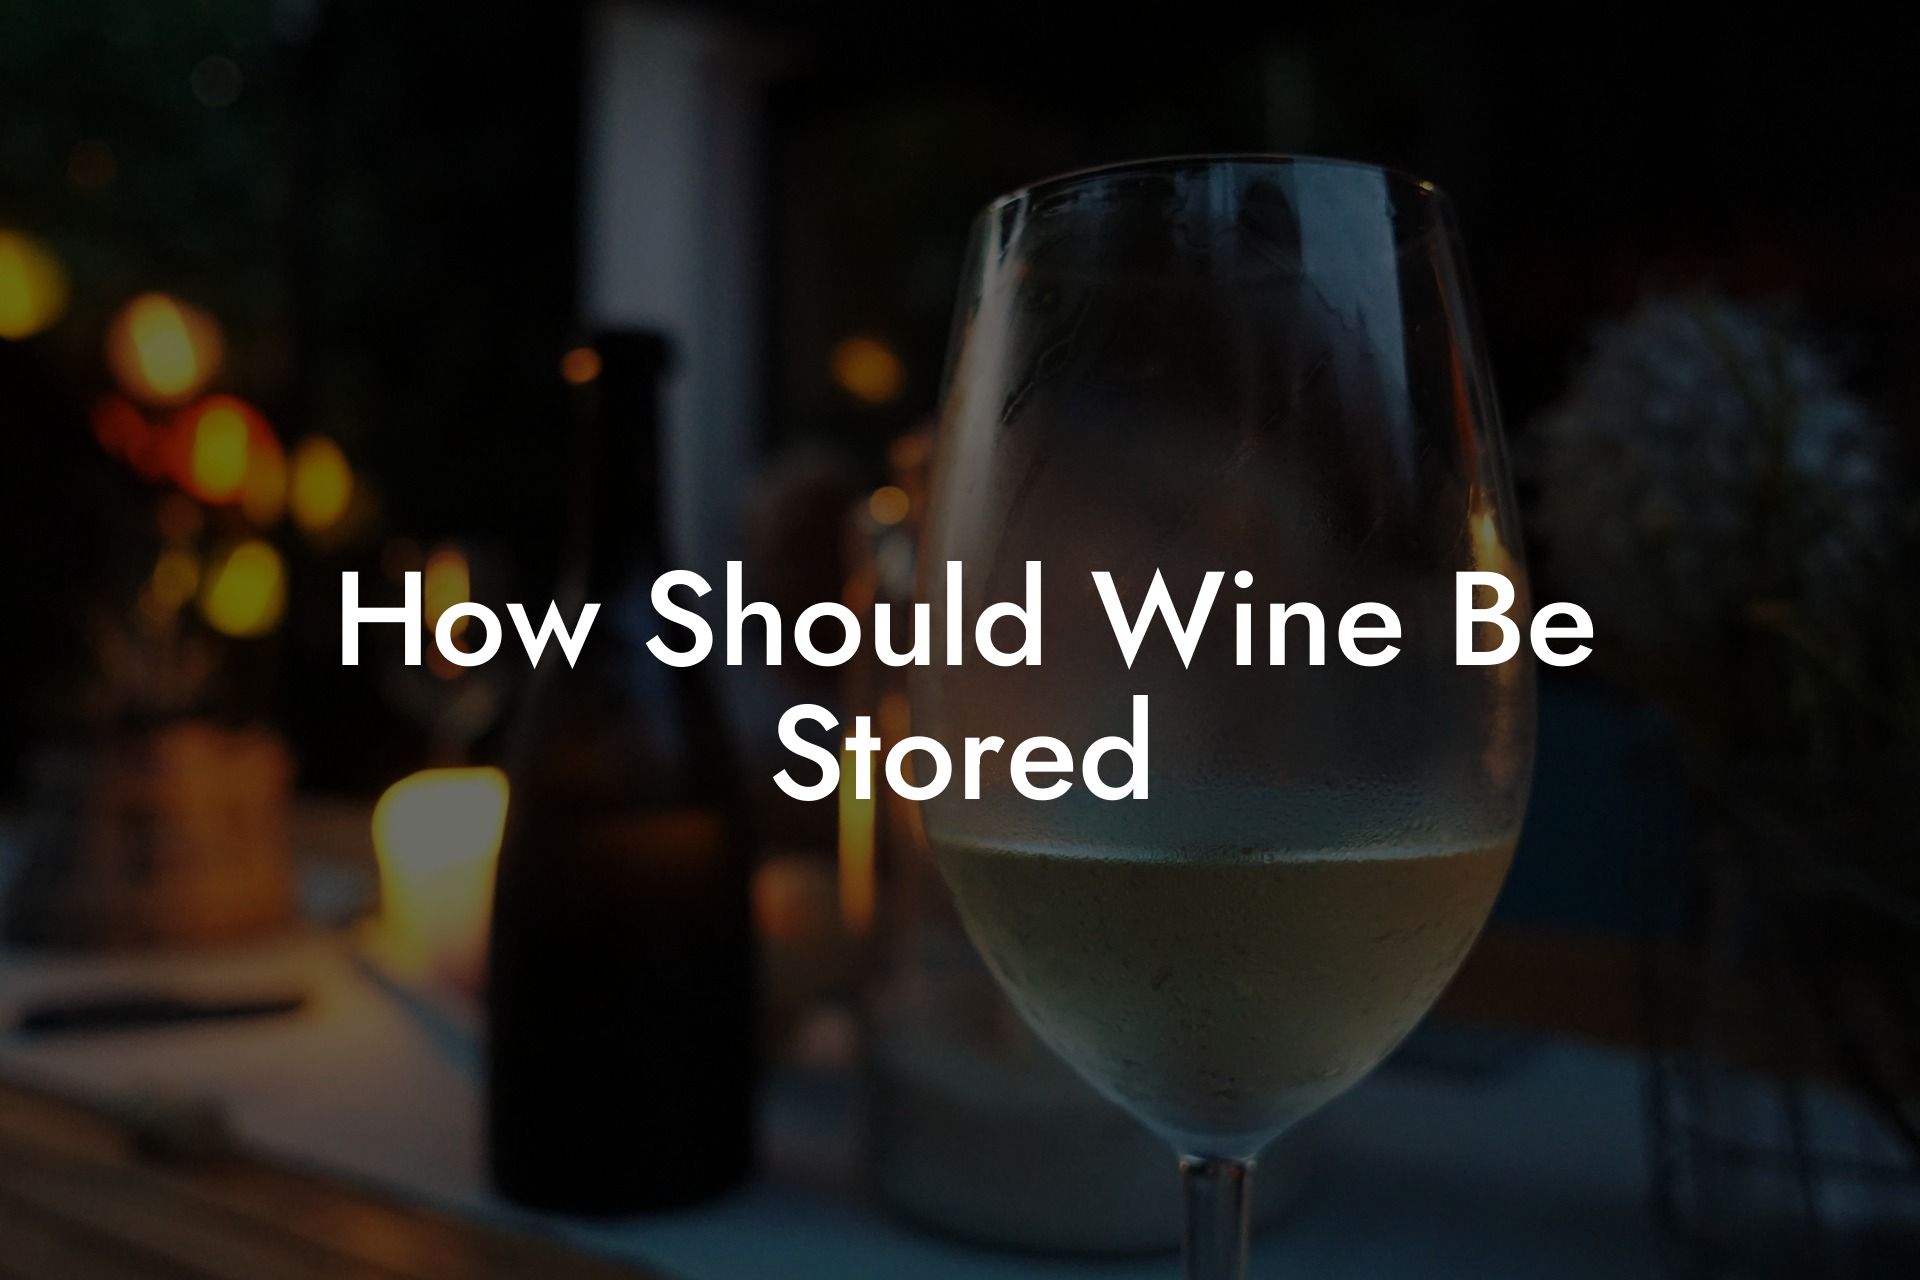 How Should Wine Be Stored